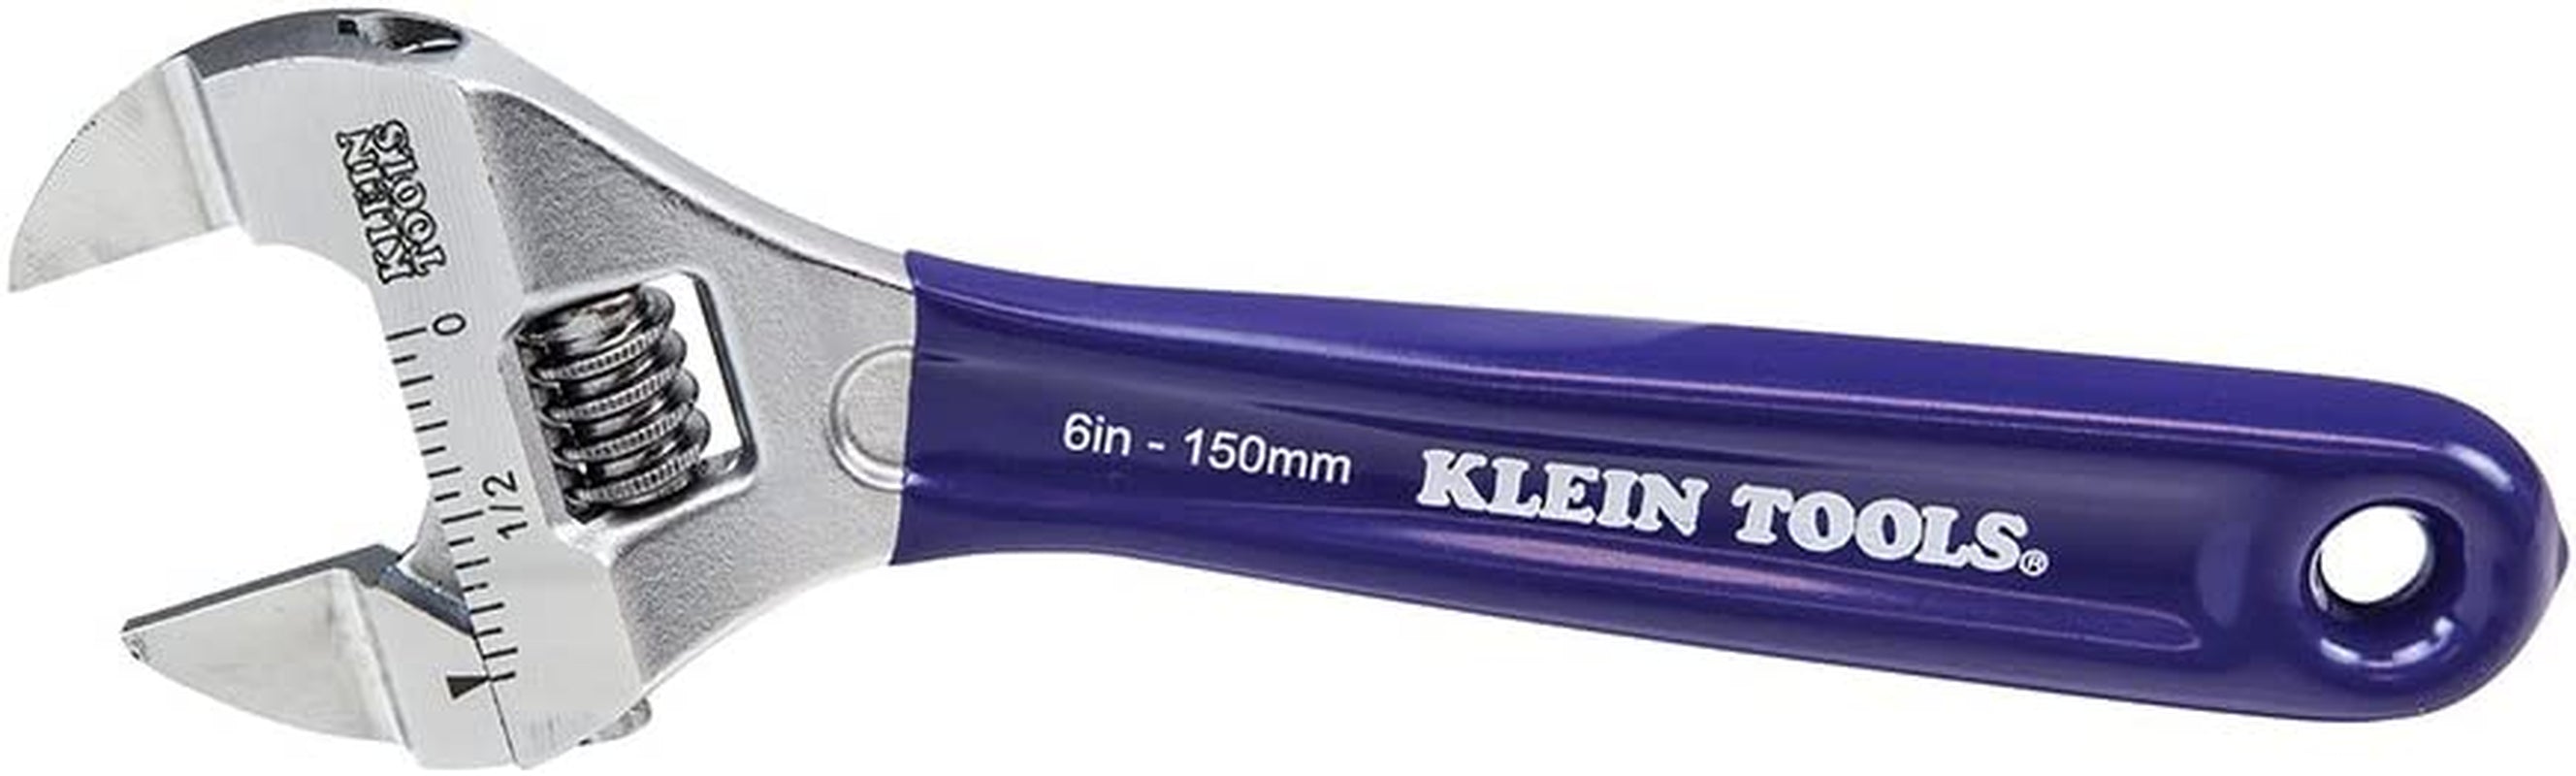 KLEIN TOOLS, Klein Tools D86936 Adjustable Wrench, Forged with Slimmer Jaw and a High Polish Chrome Finish, 8-Inch